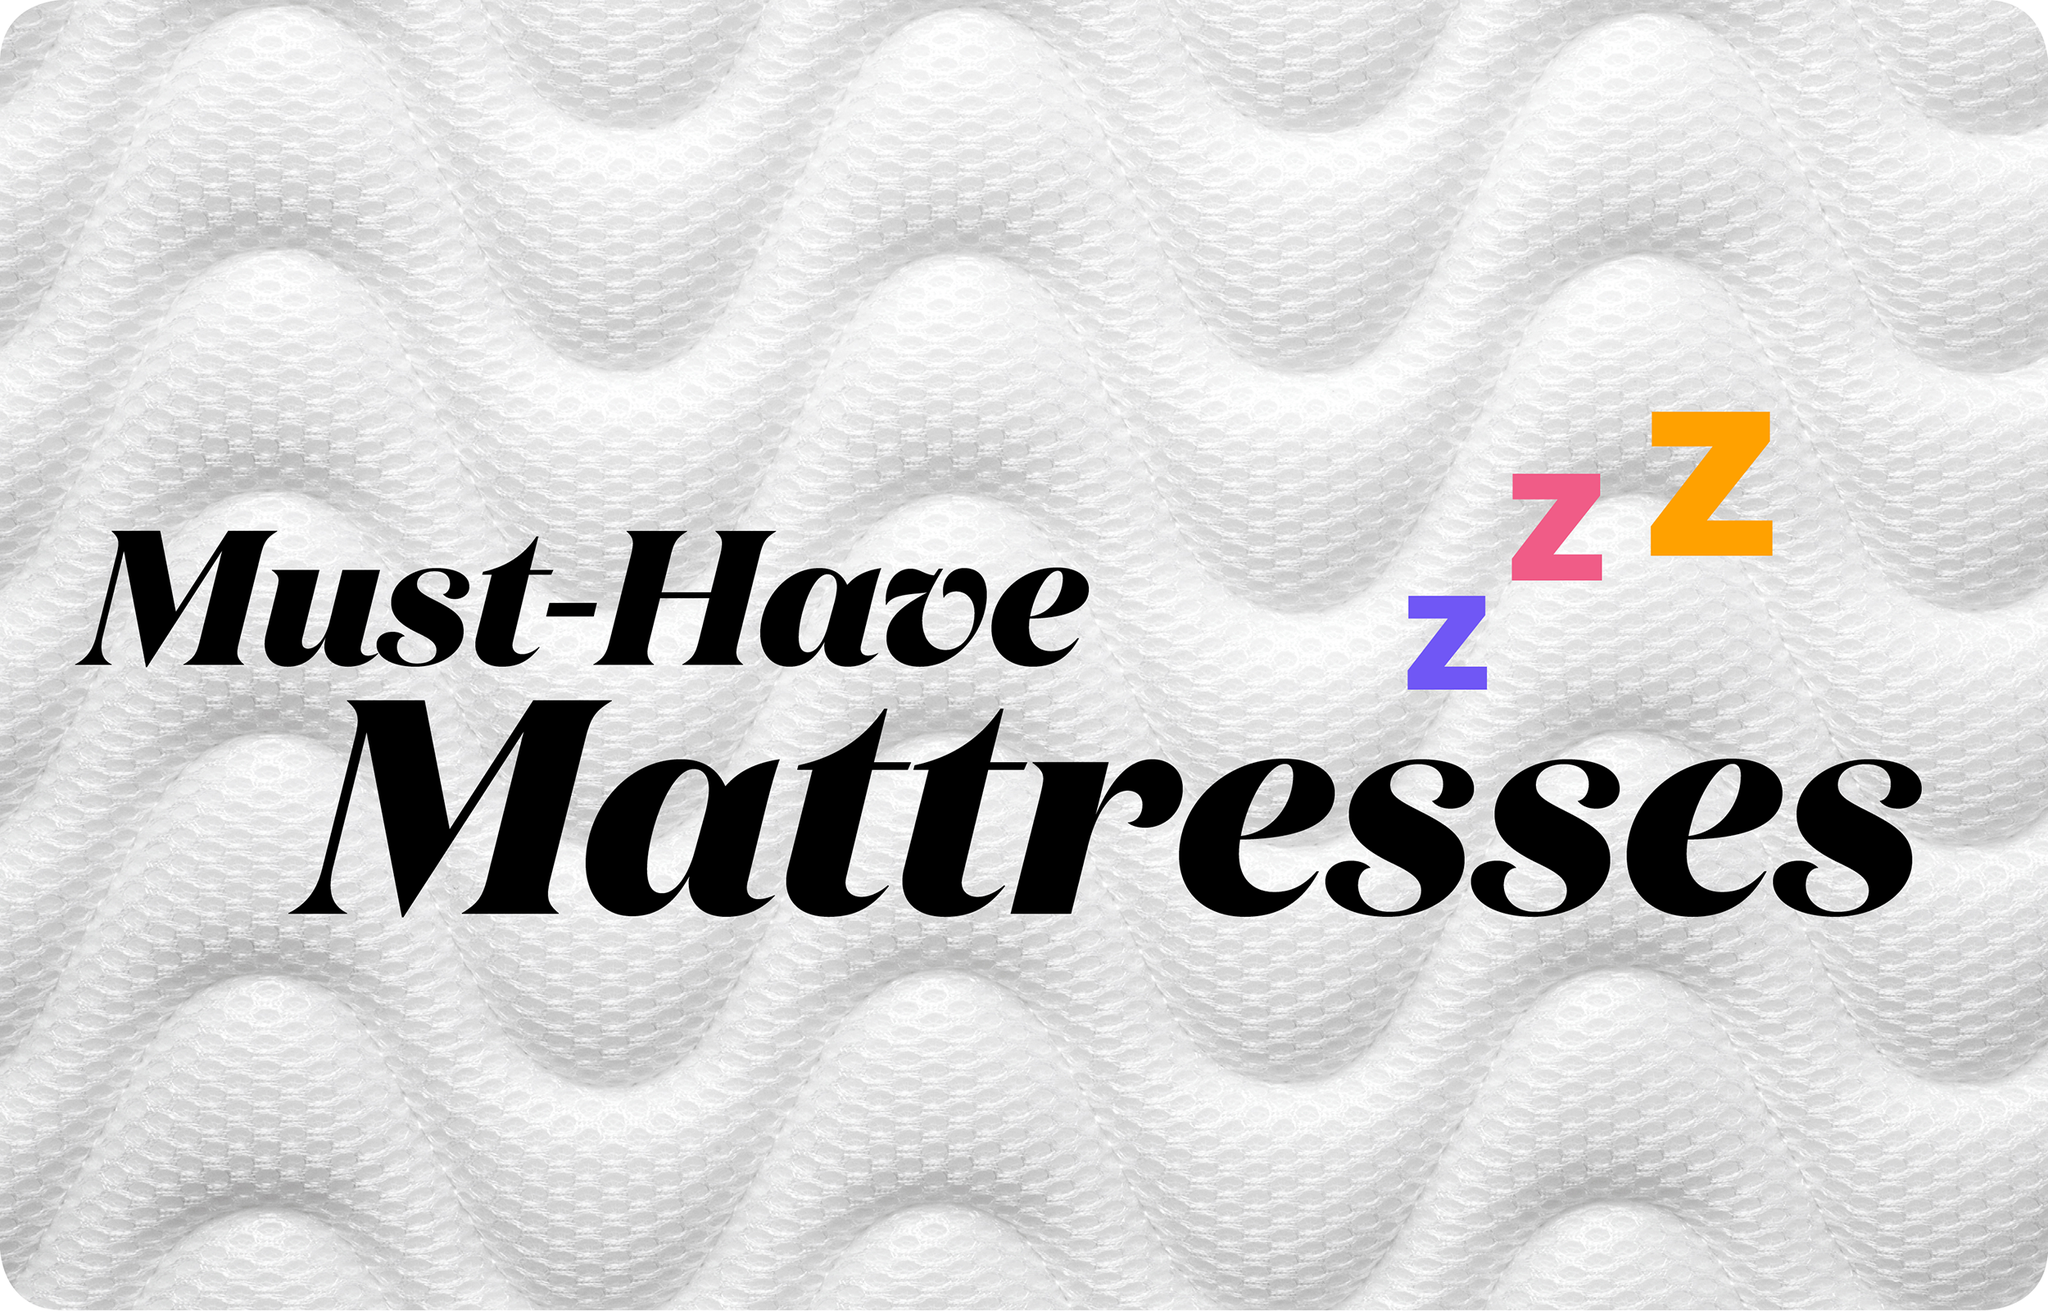 must have mattresses